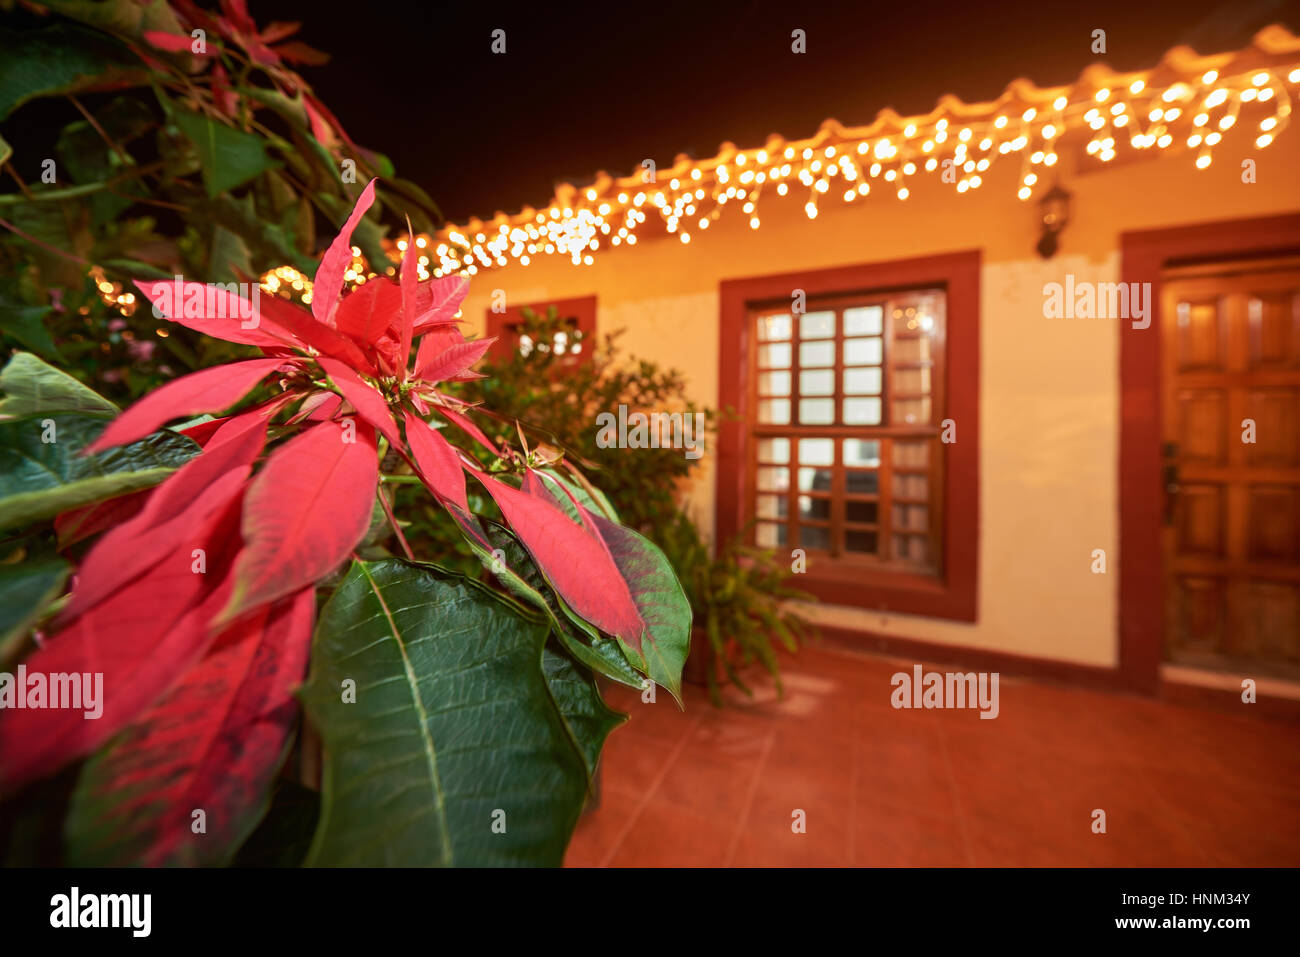 red petal flower on christmas decorated blurred house Stock Photo